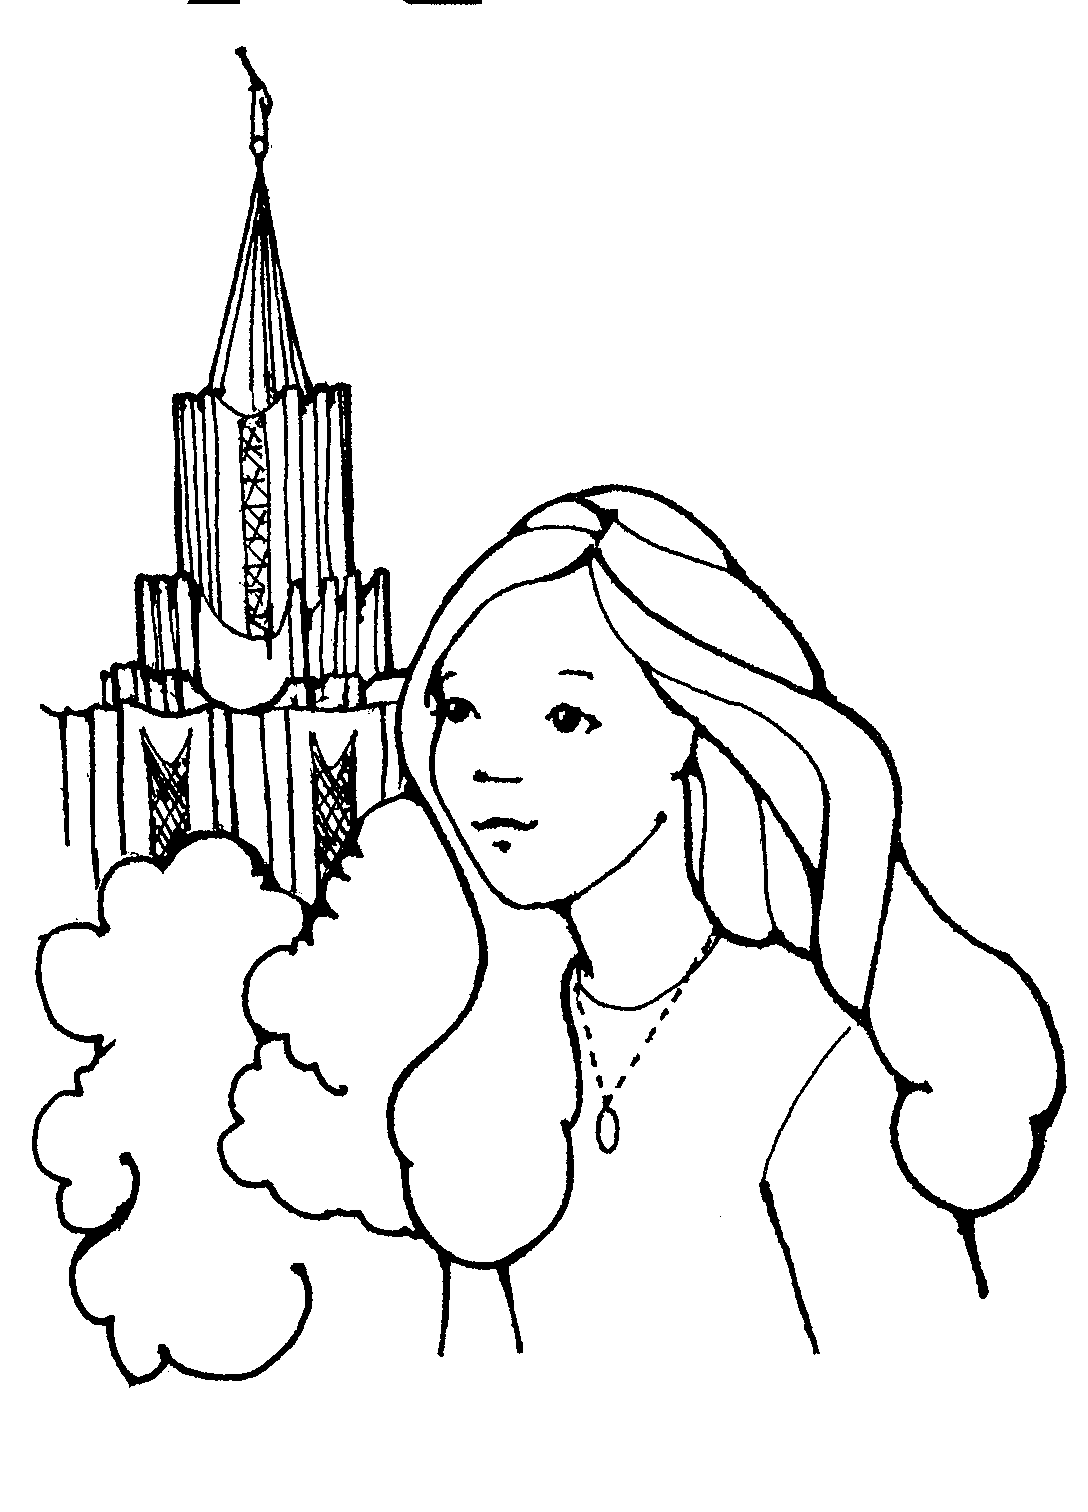 free black and white lds clipart - photo #2